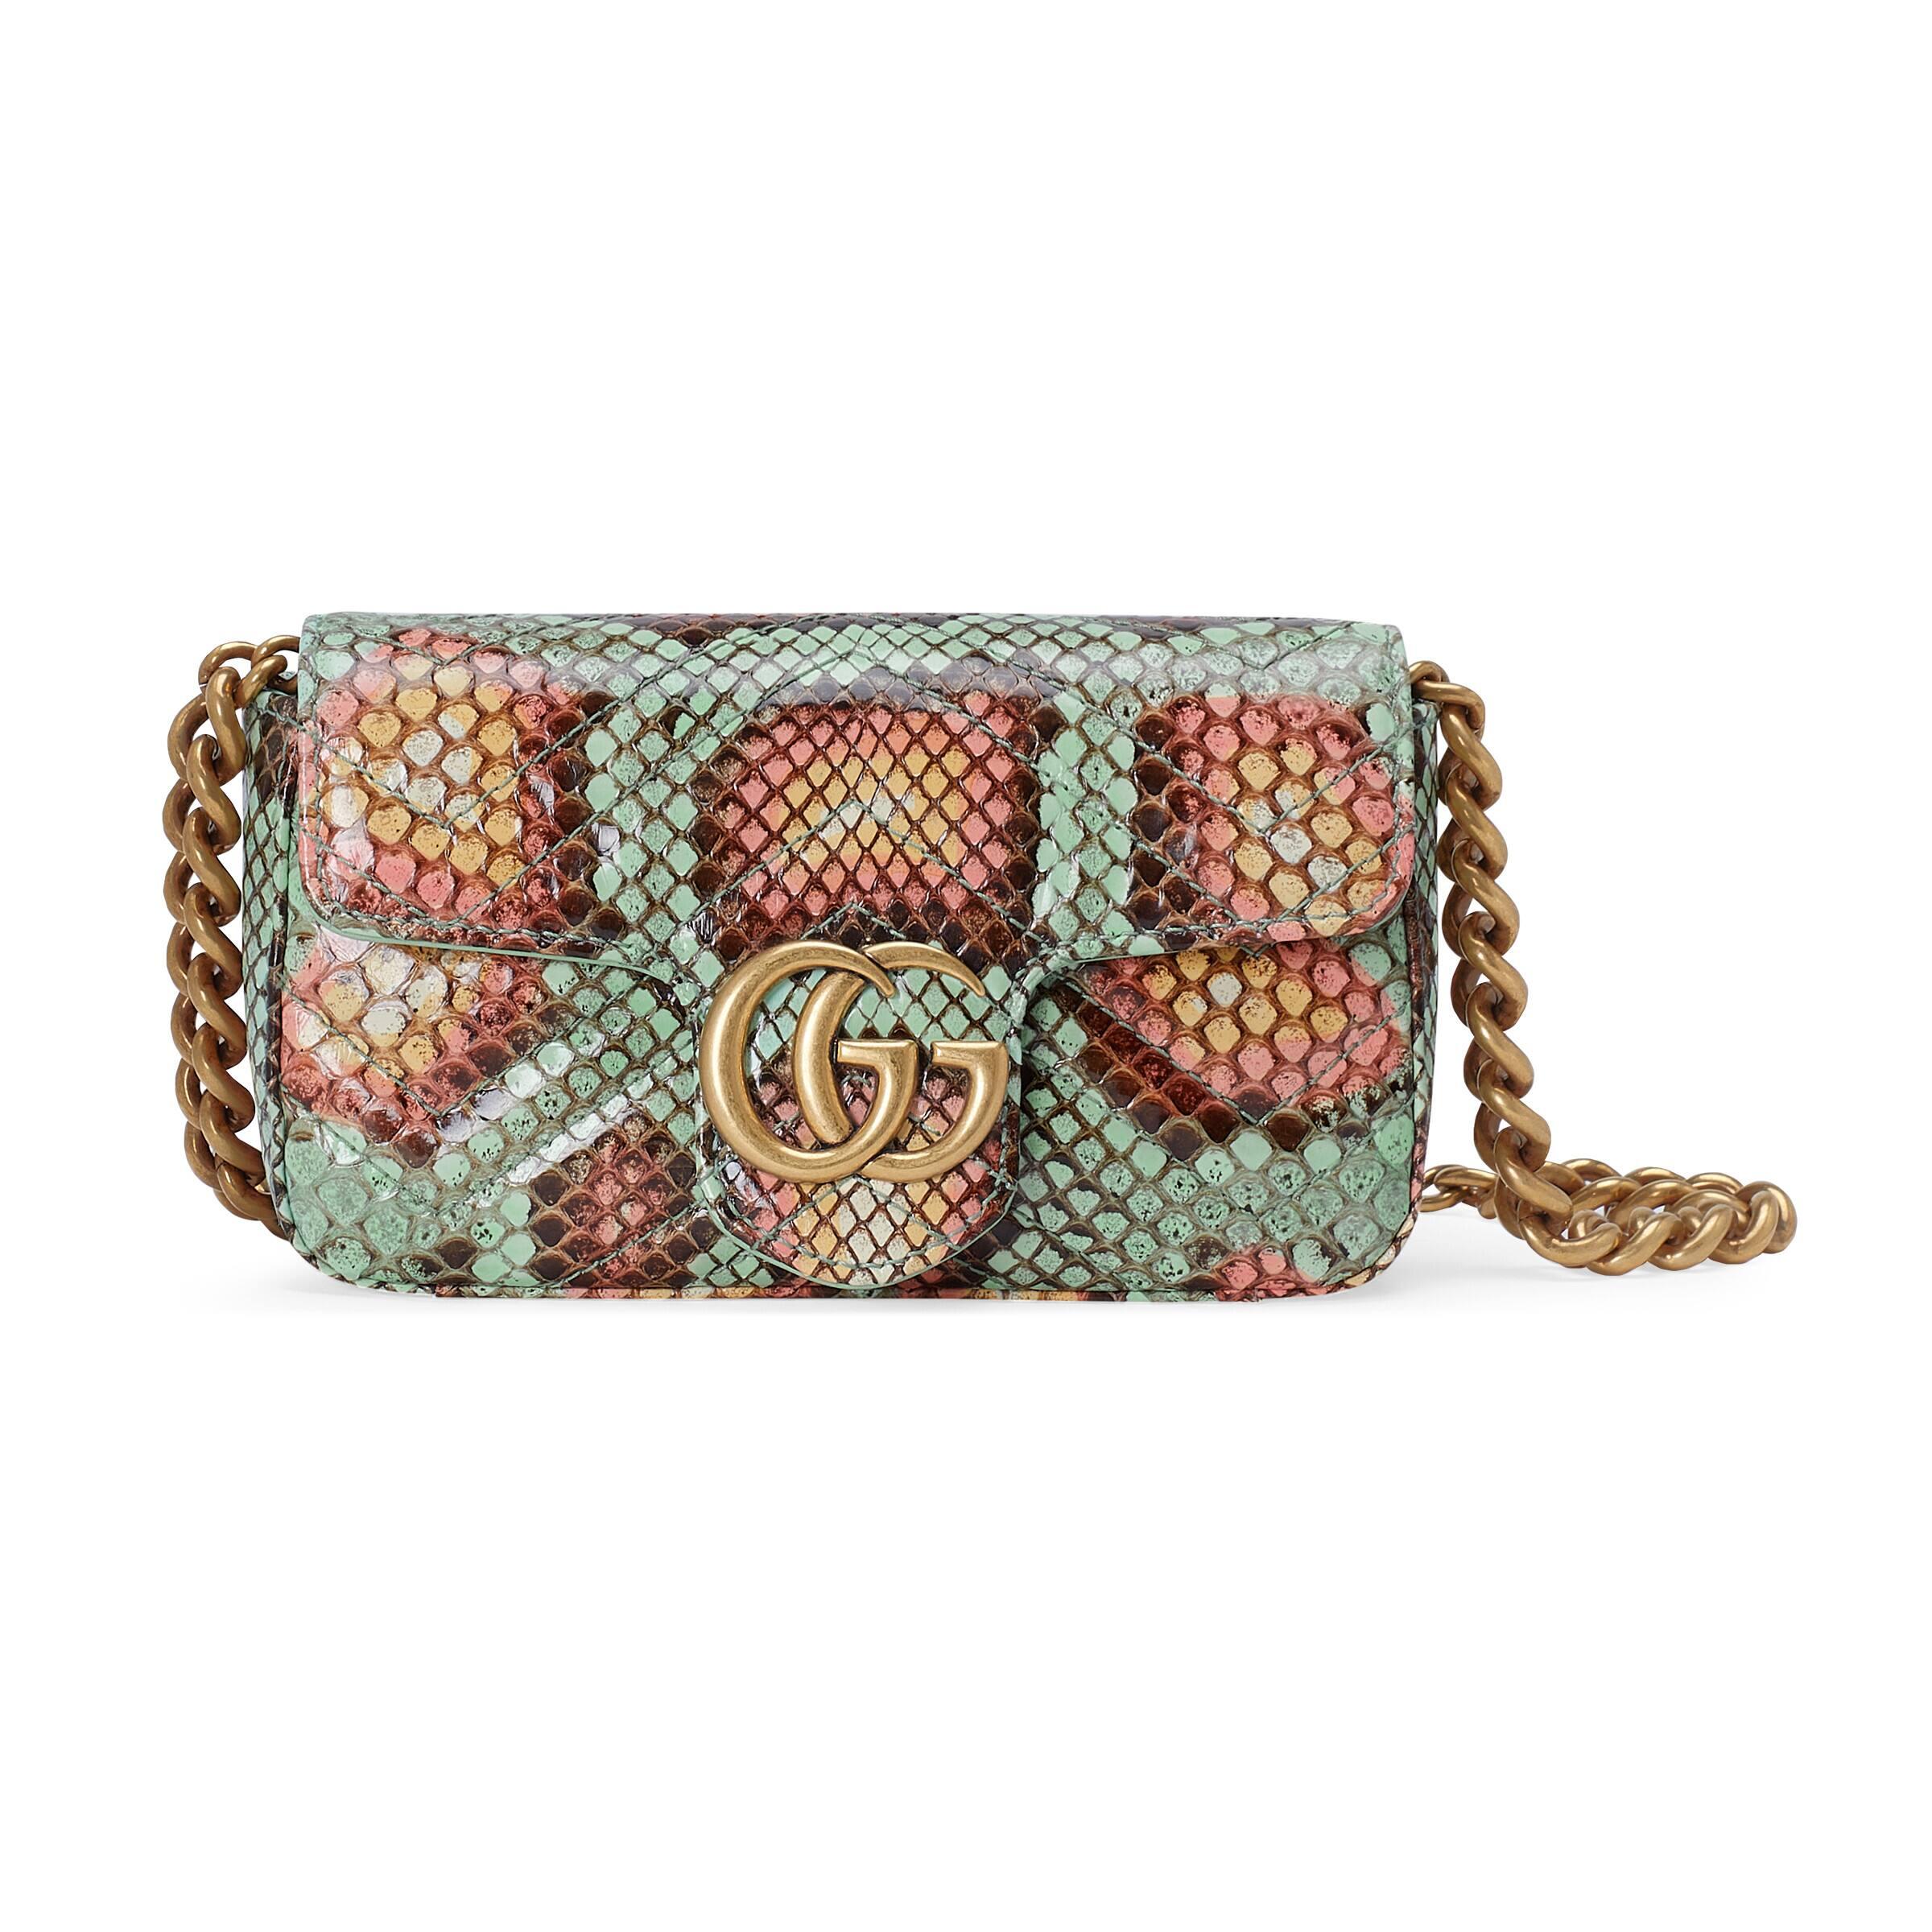 Gucci GG Marmont Python Belt Bag in Natural | Lyst